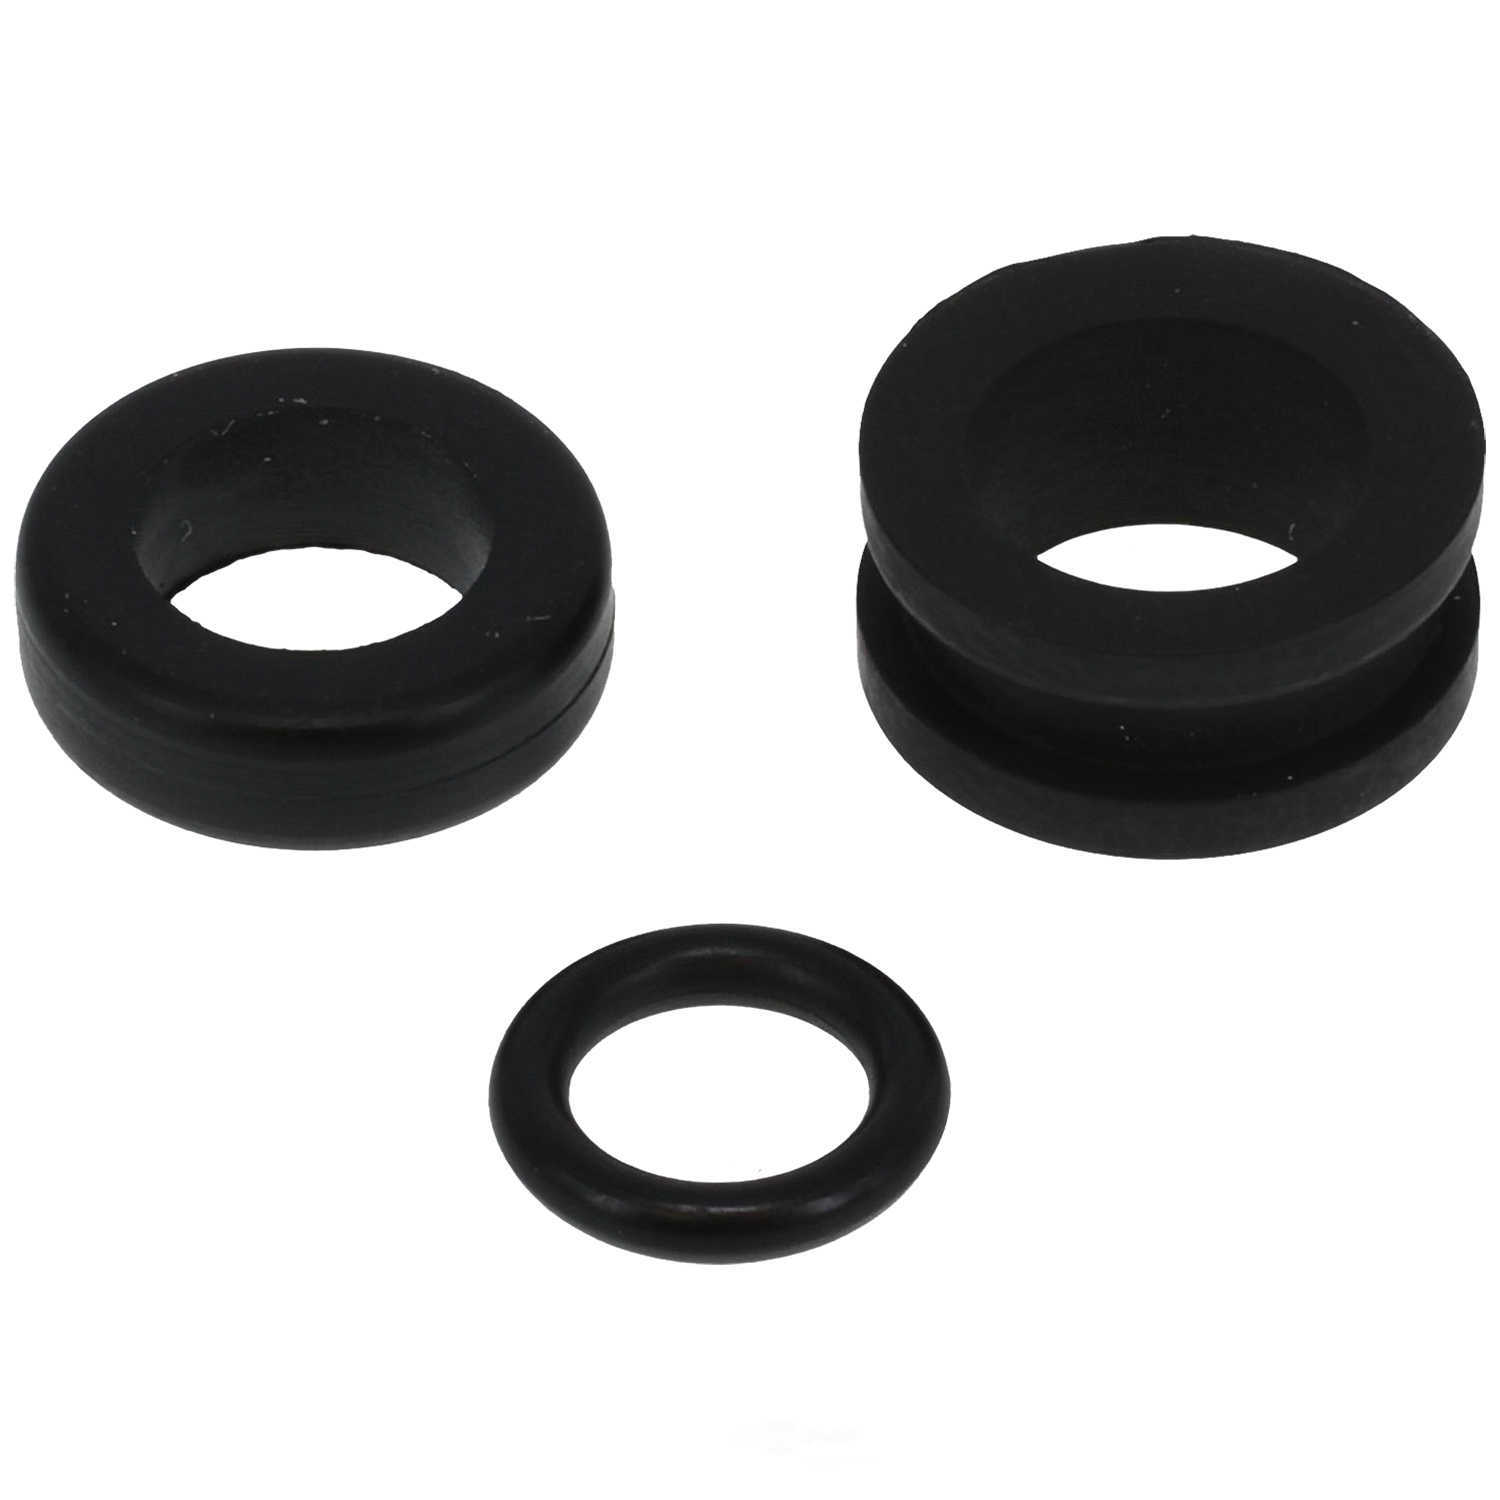 GB REMANUFACTURING INC. - Fuel Injector Seal Kit - GBR 8-023